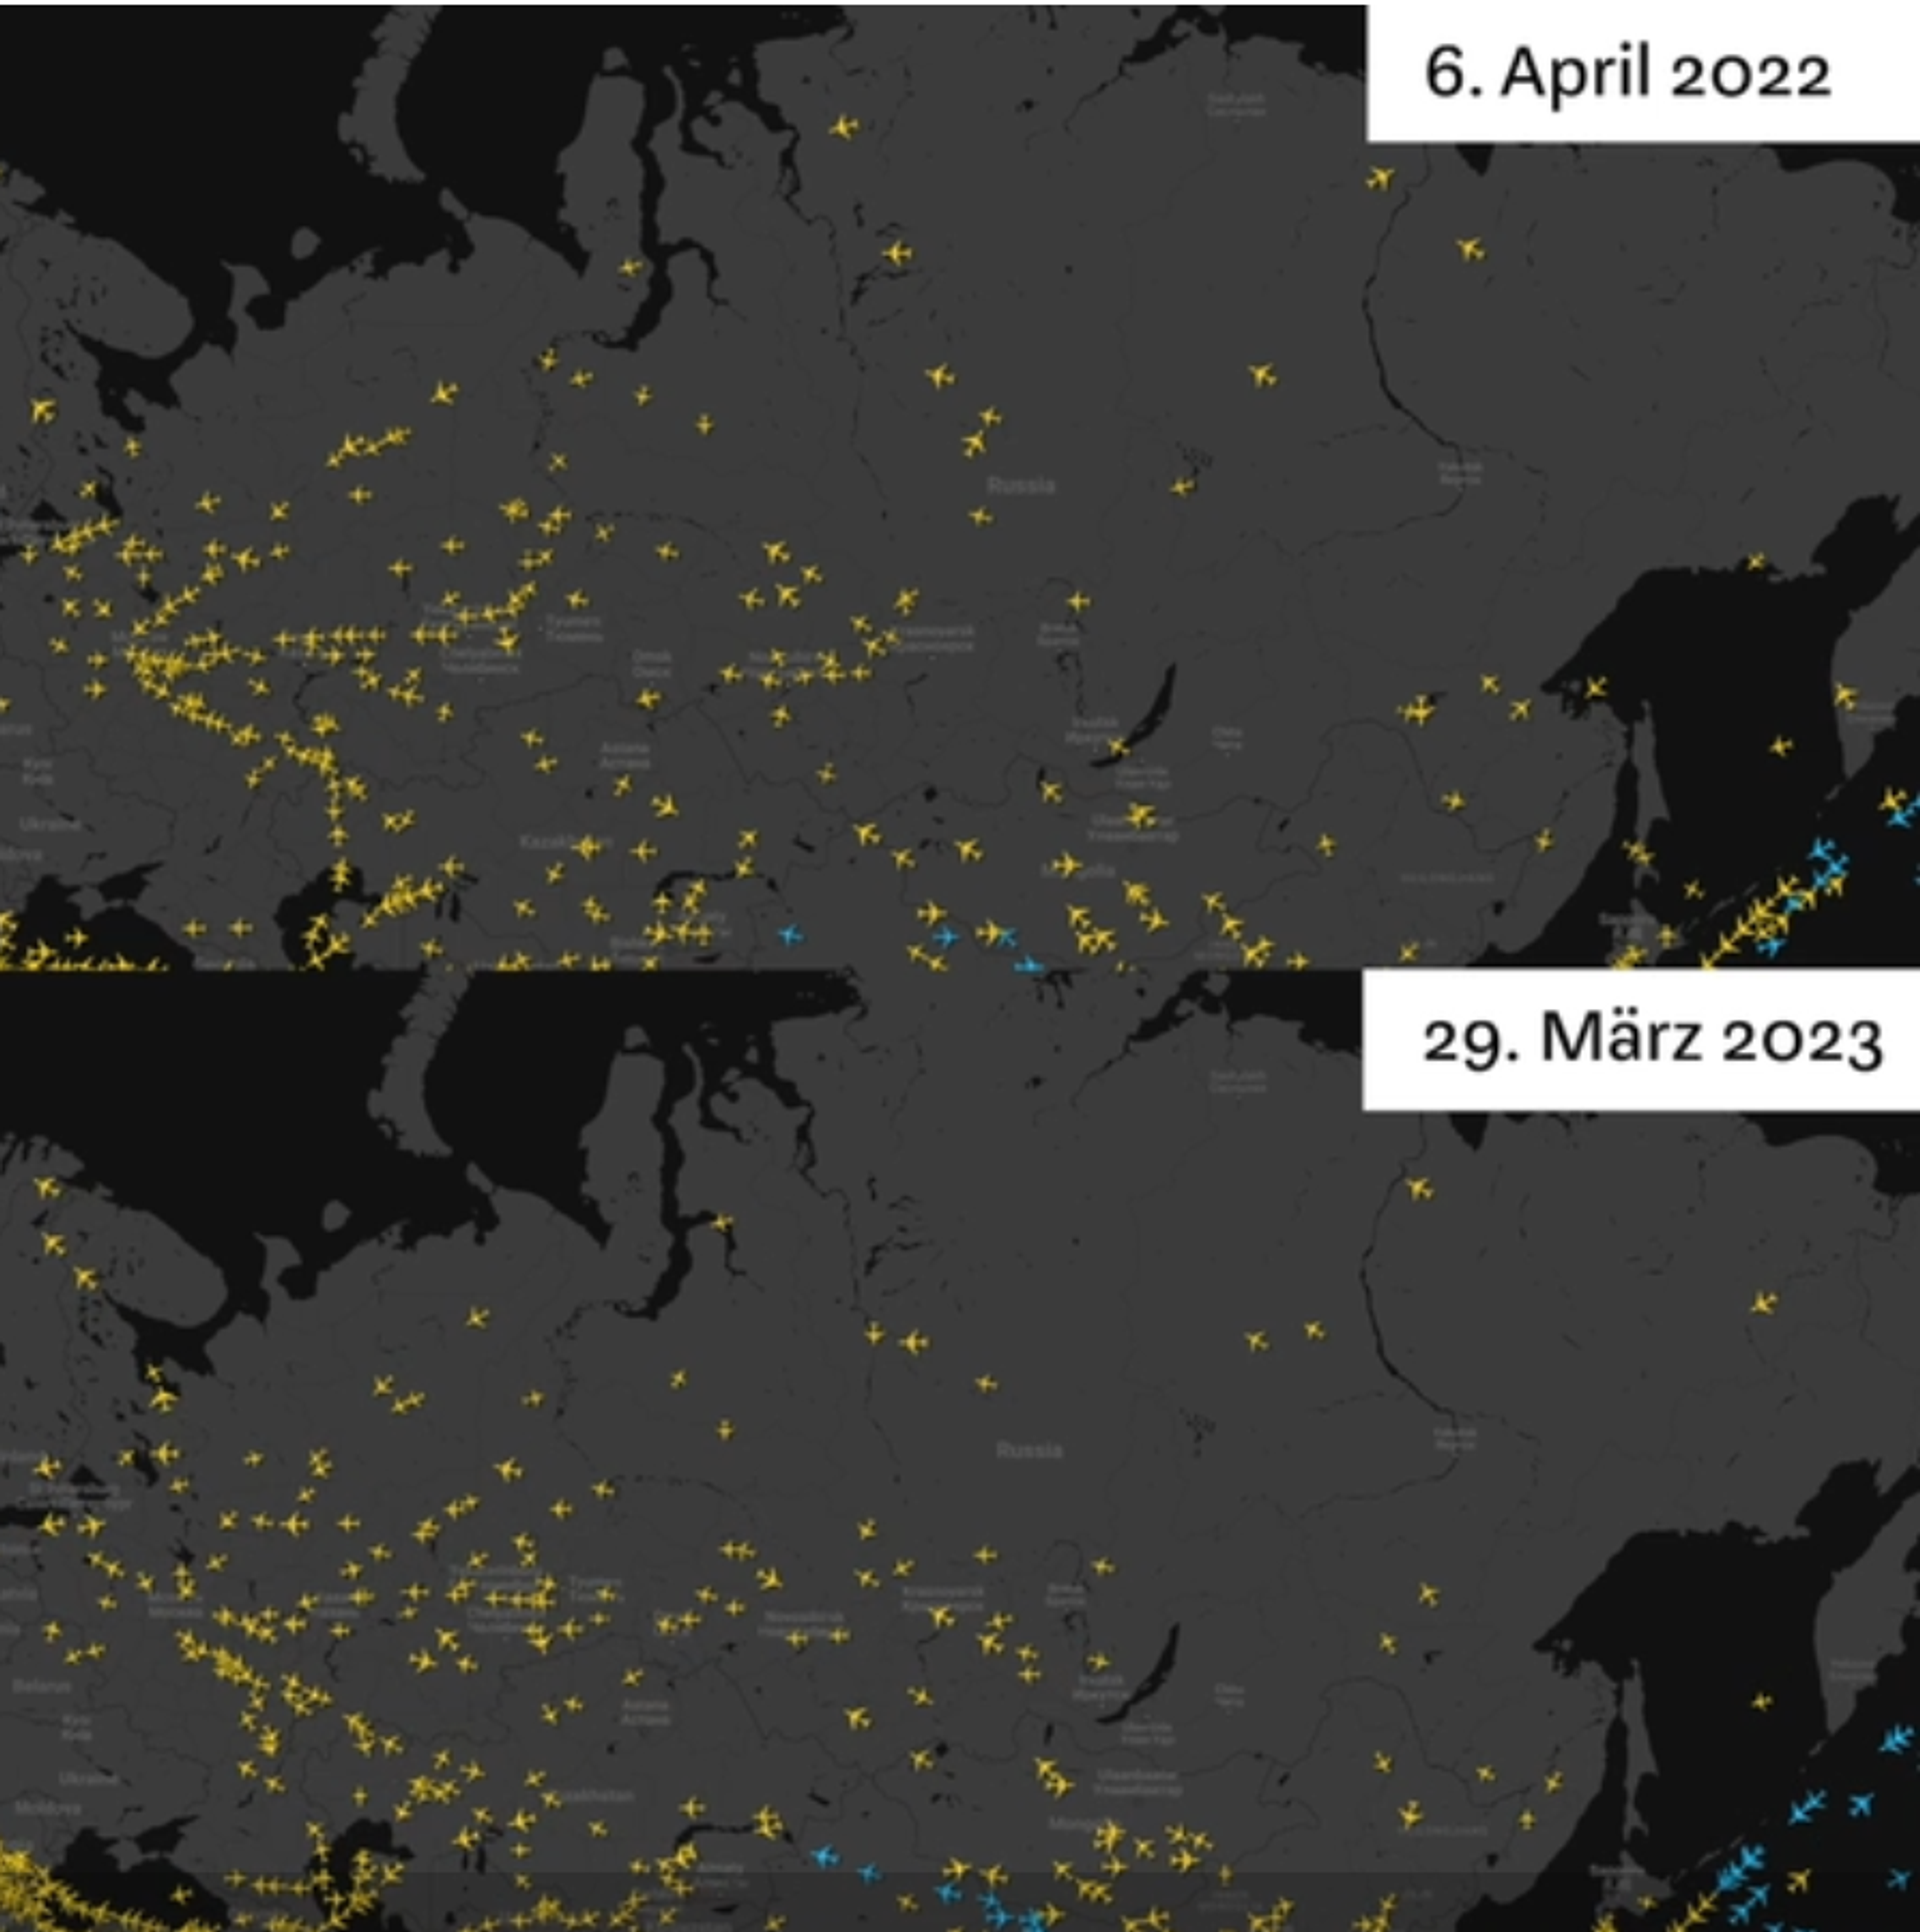 Screengrab from Wirtschaftswoche time elapse video comparing commercial air traffic over Russia in April 2022 and late March 2023. - Sputnik International, 1920, 26.04.2023